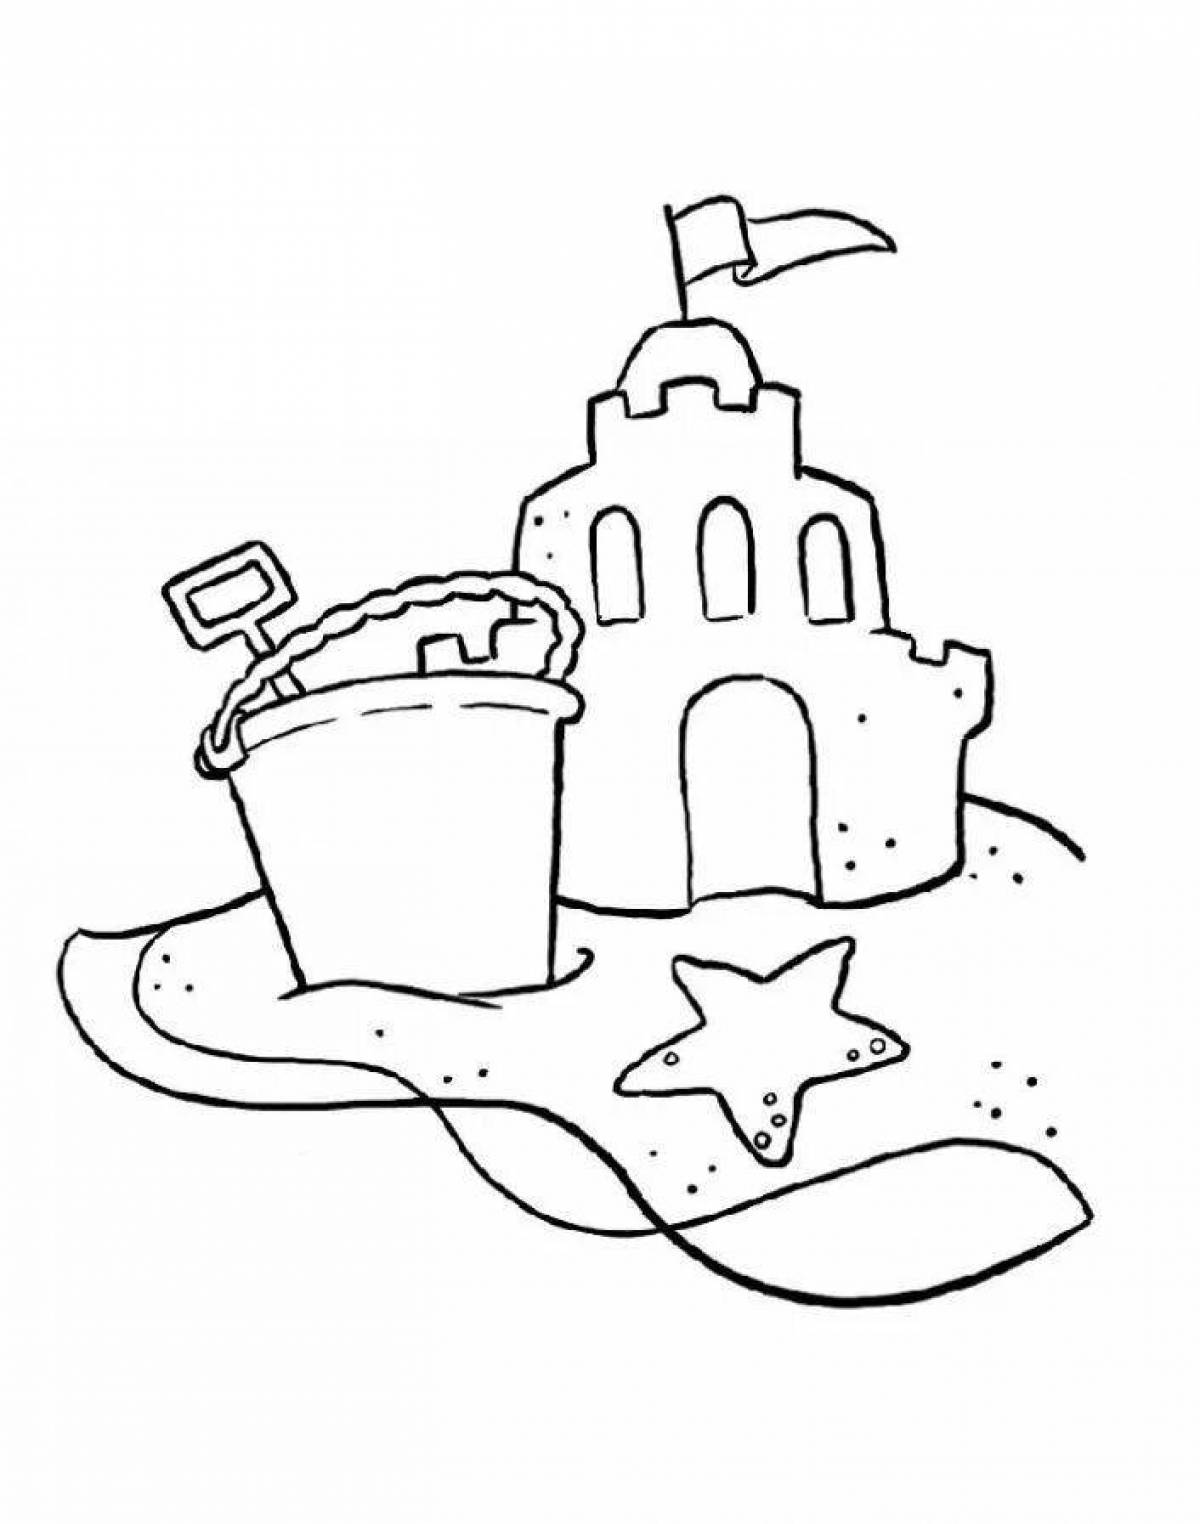 Coloring page with colorful sand